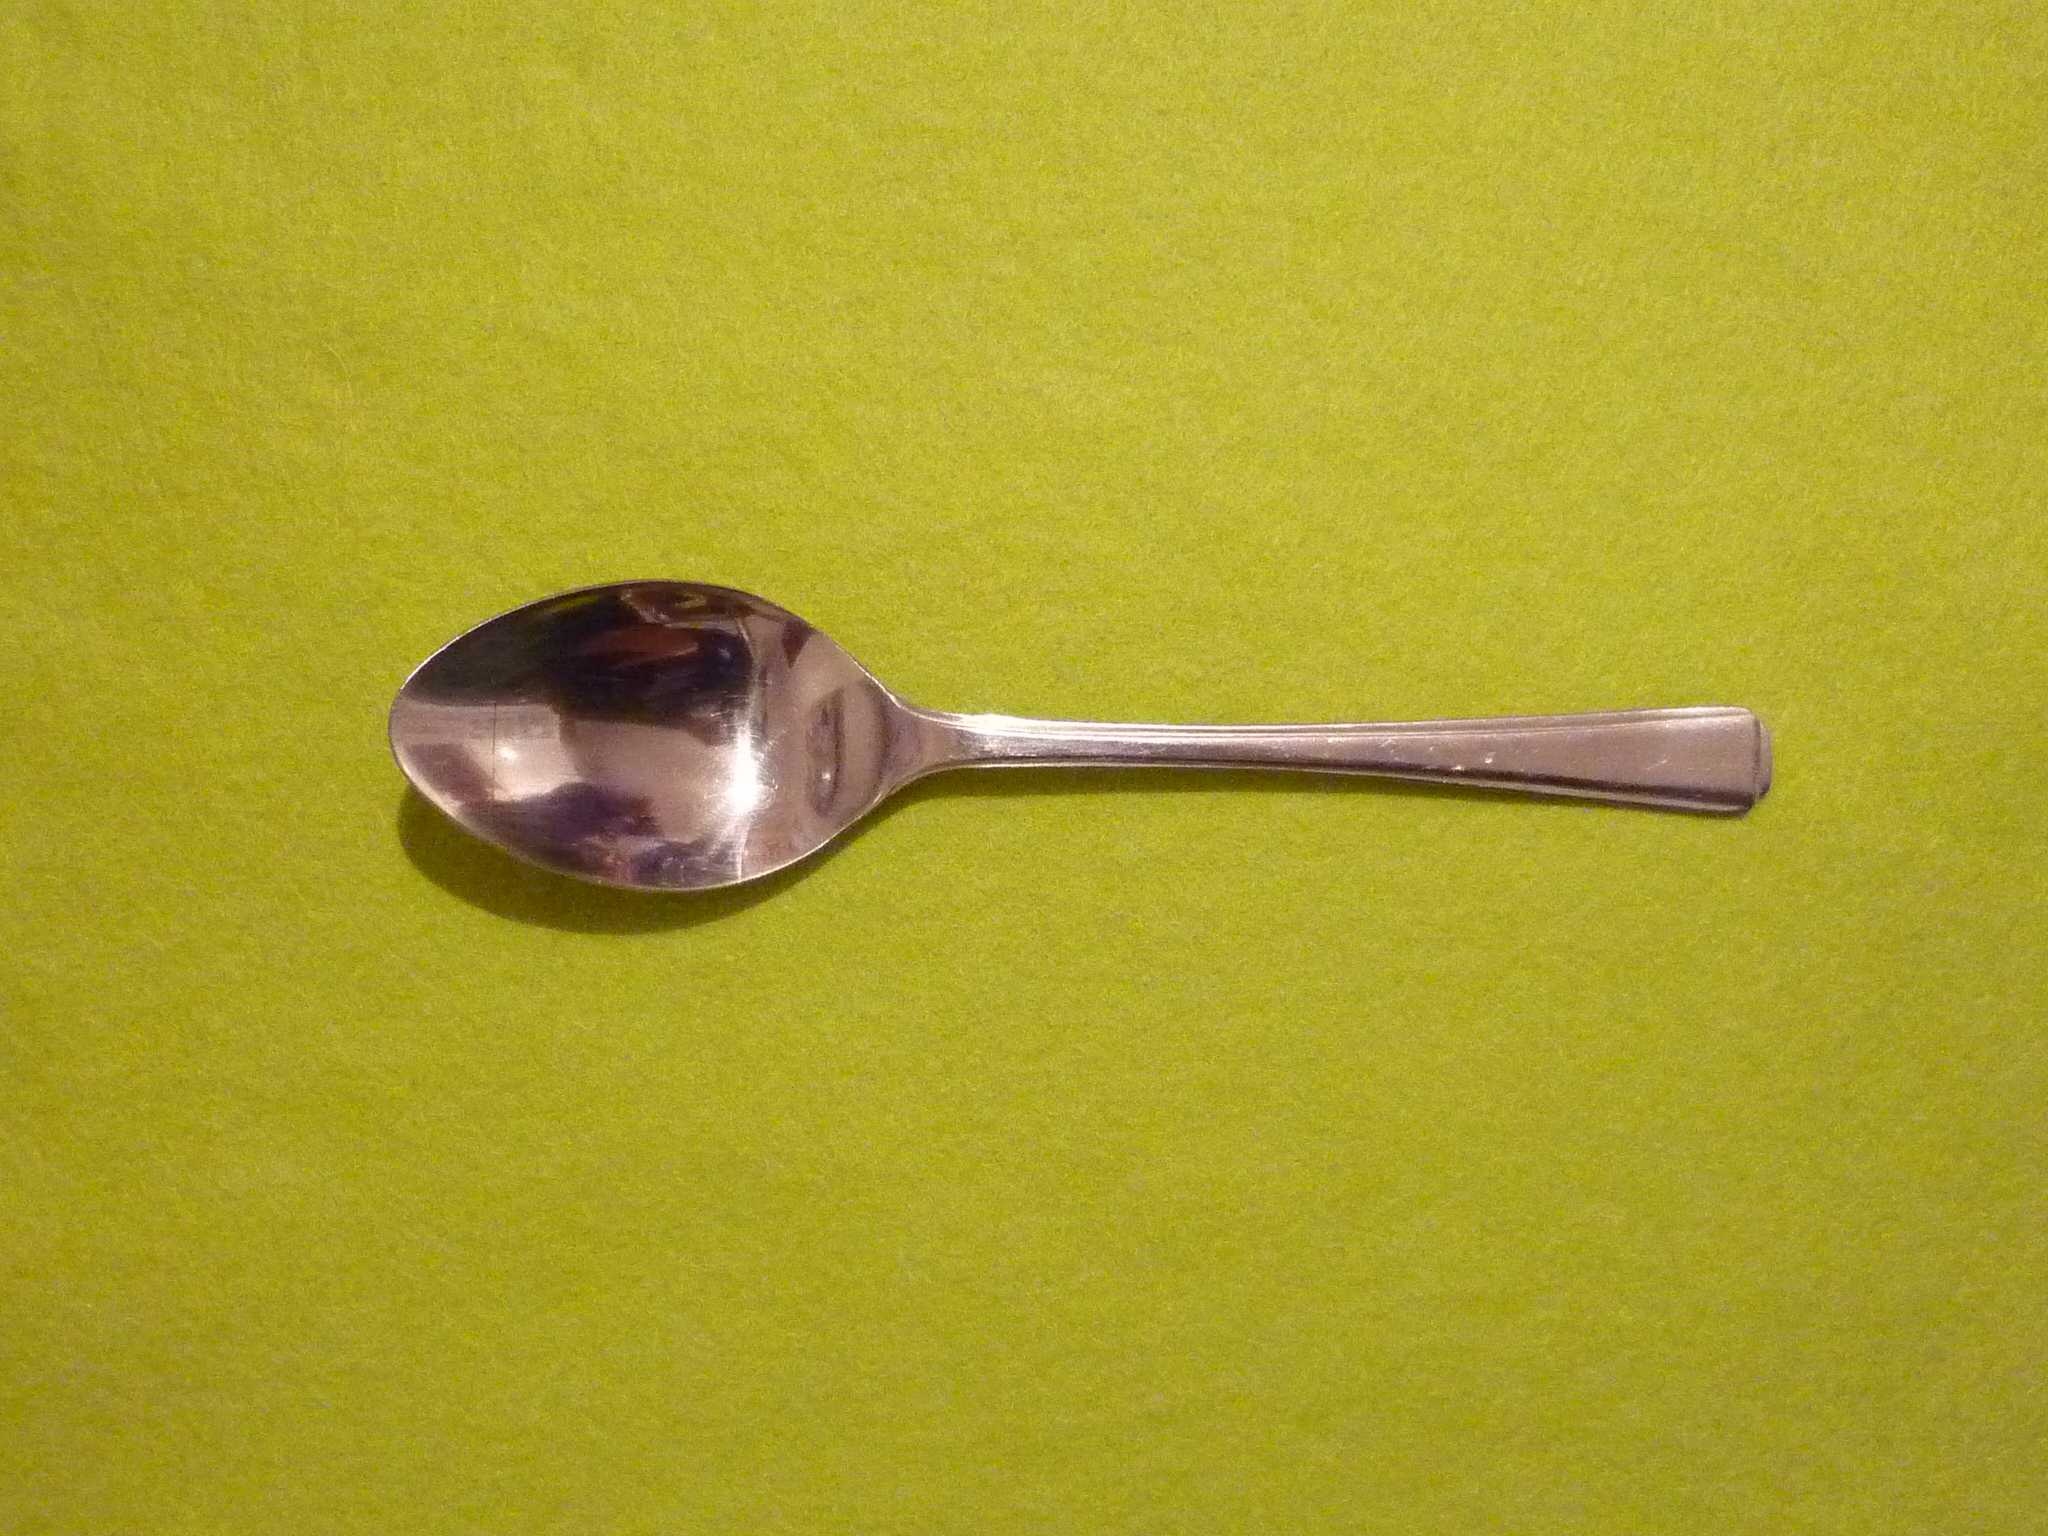 Dessert spoon image classifcation dataset for machine learning